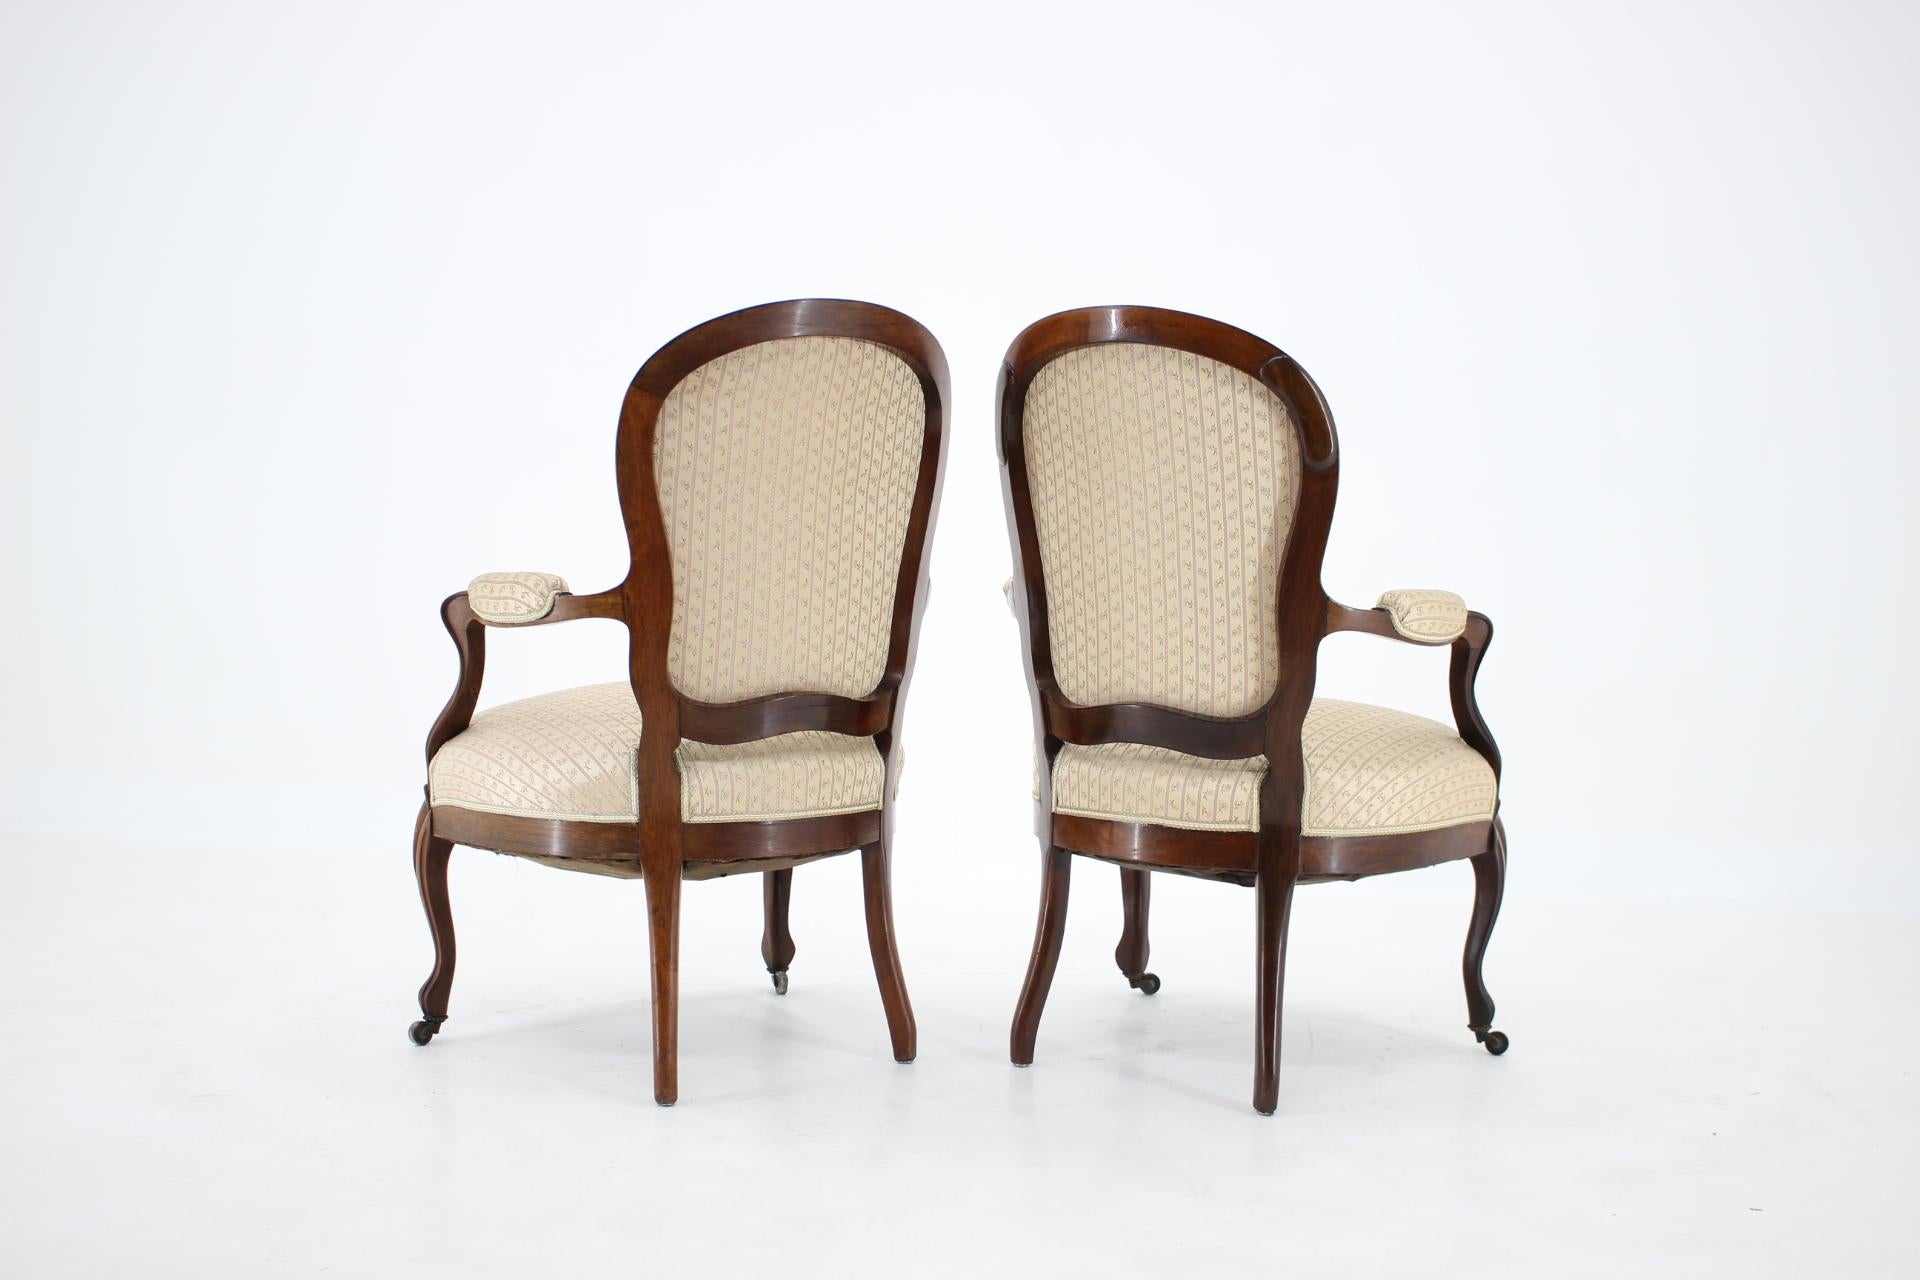 1900s Pair of Original Danish Rococo Chairs For Sale 1